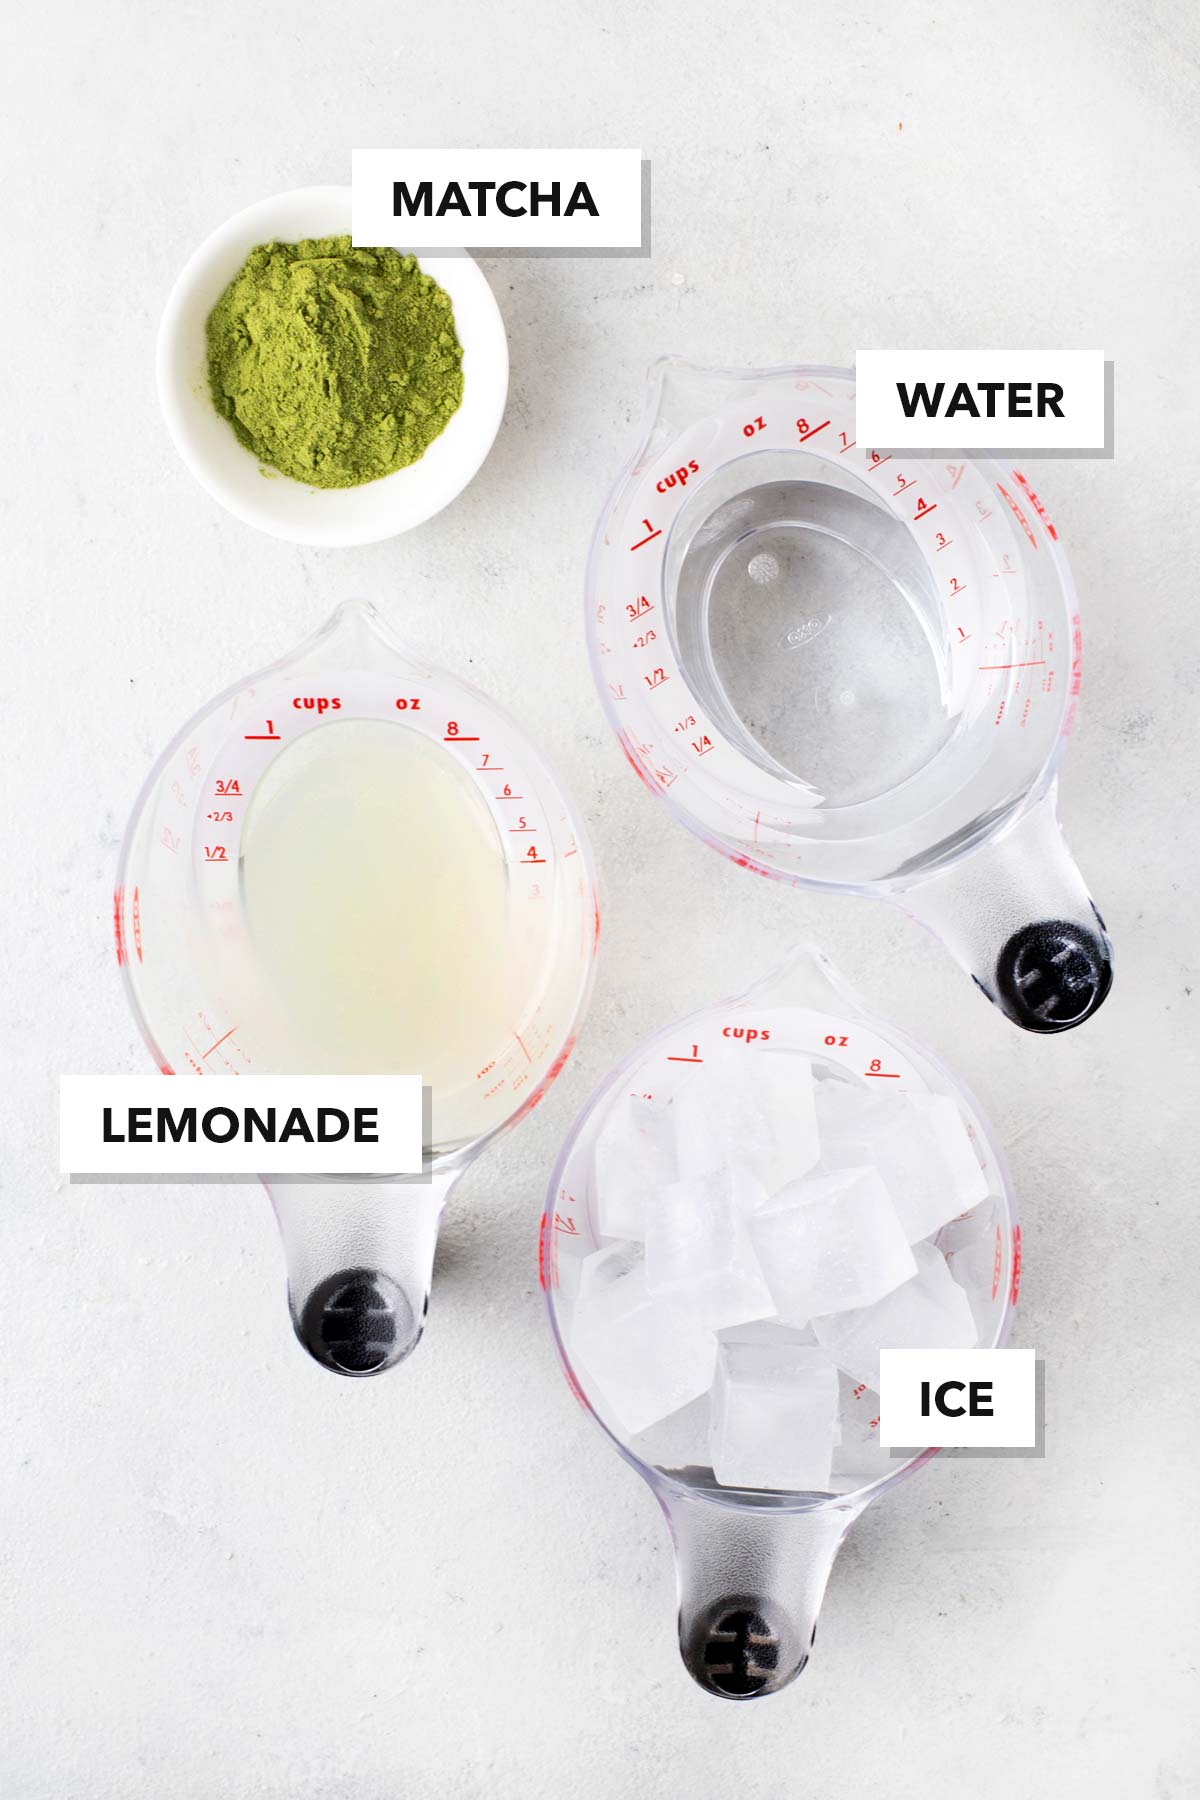 Matcha Lemonade ingredients measured in cups and labeled on a table.